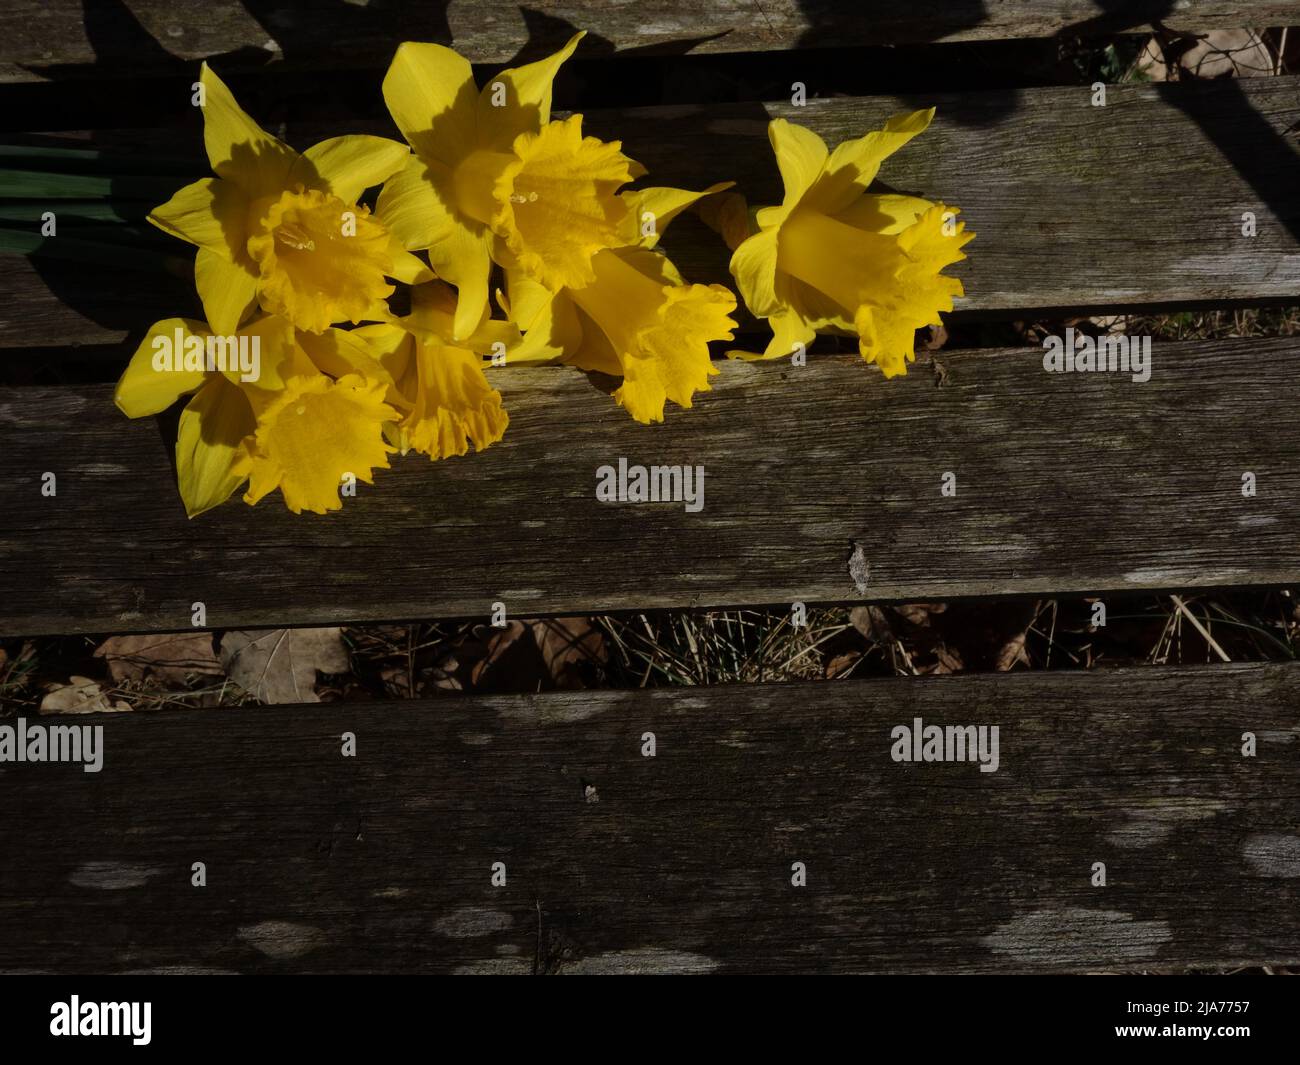 Daffodils laid on a bench, background for cards, signs, scrapbook or own ideas. Stock Photo